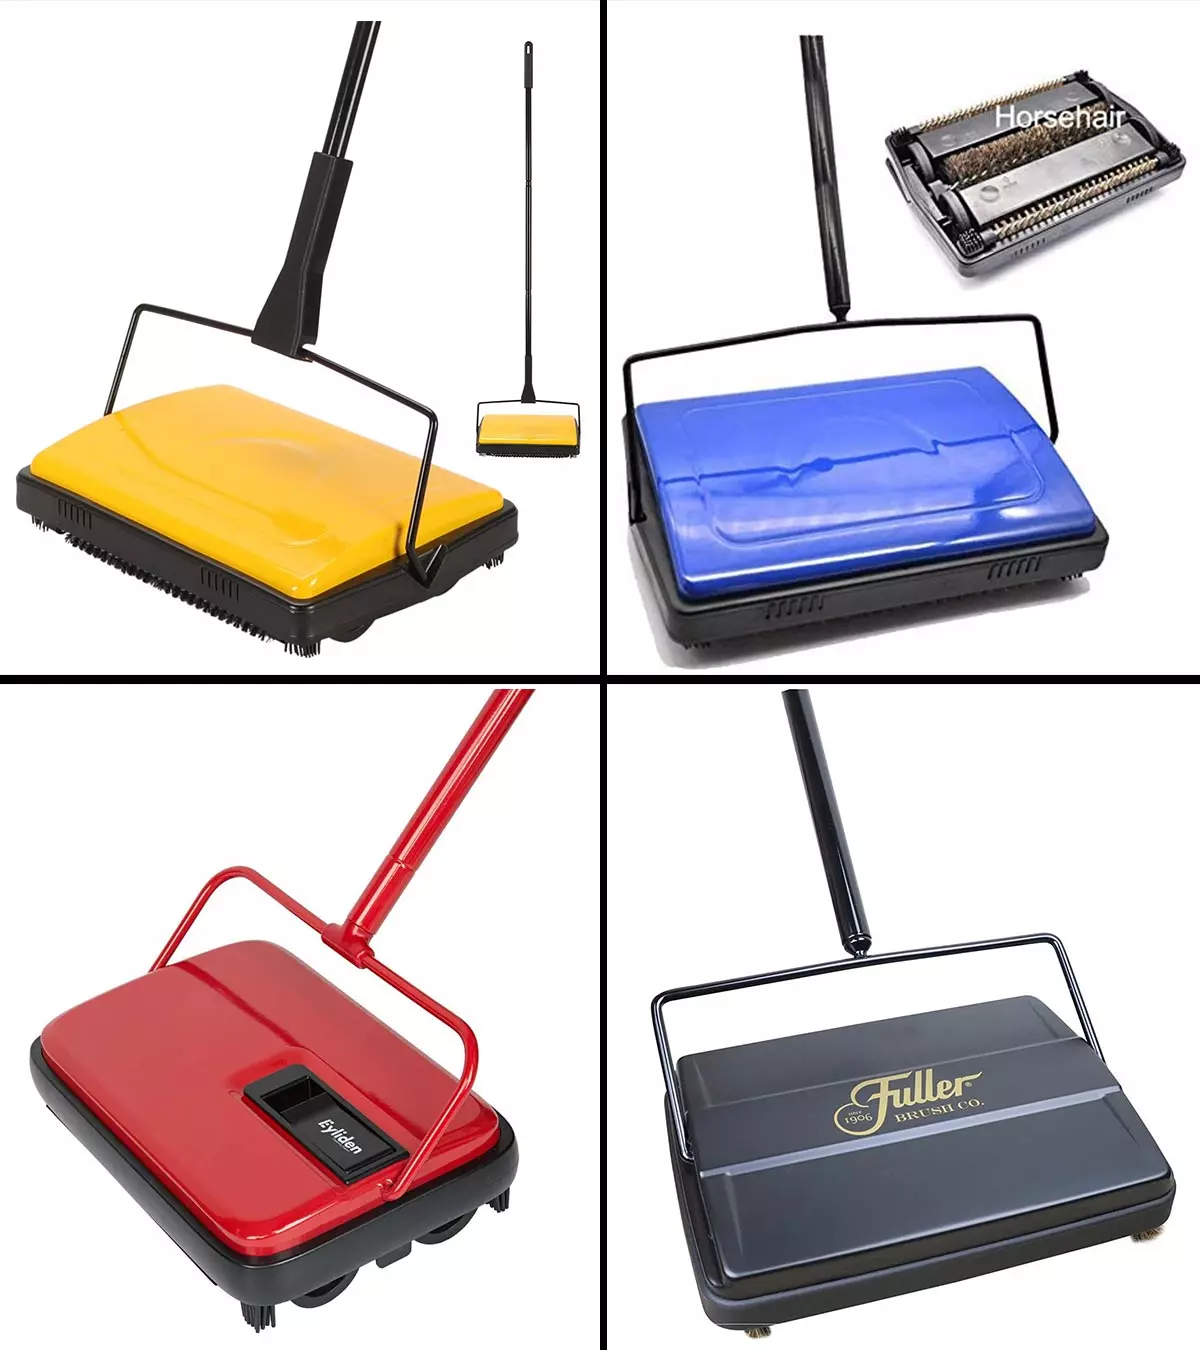 15 Best Carpet Sweepers To Buy In 2020